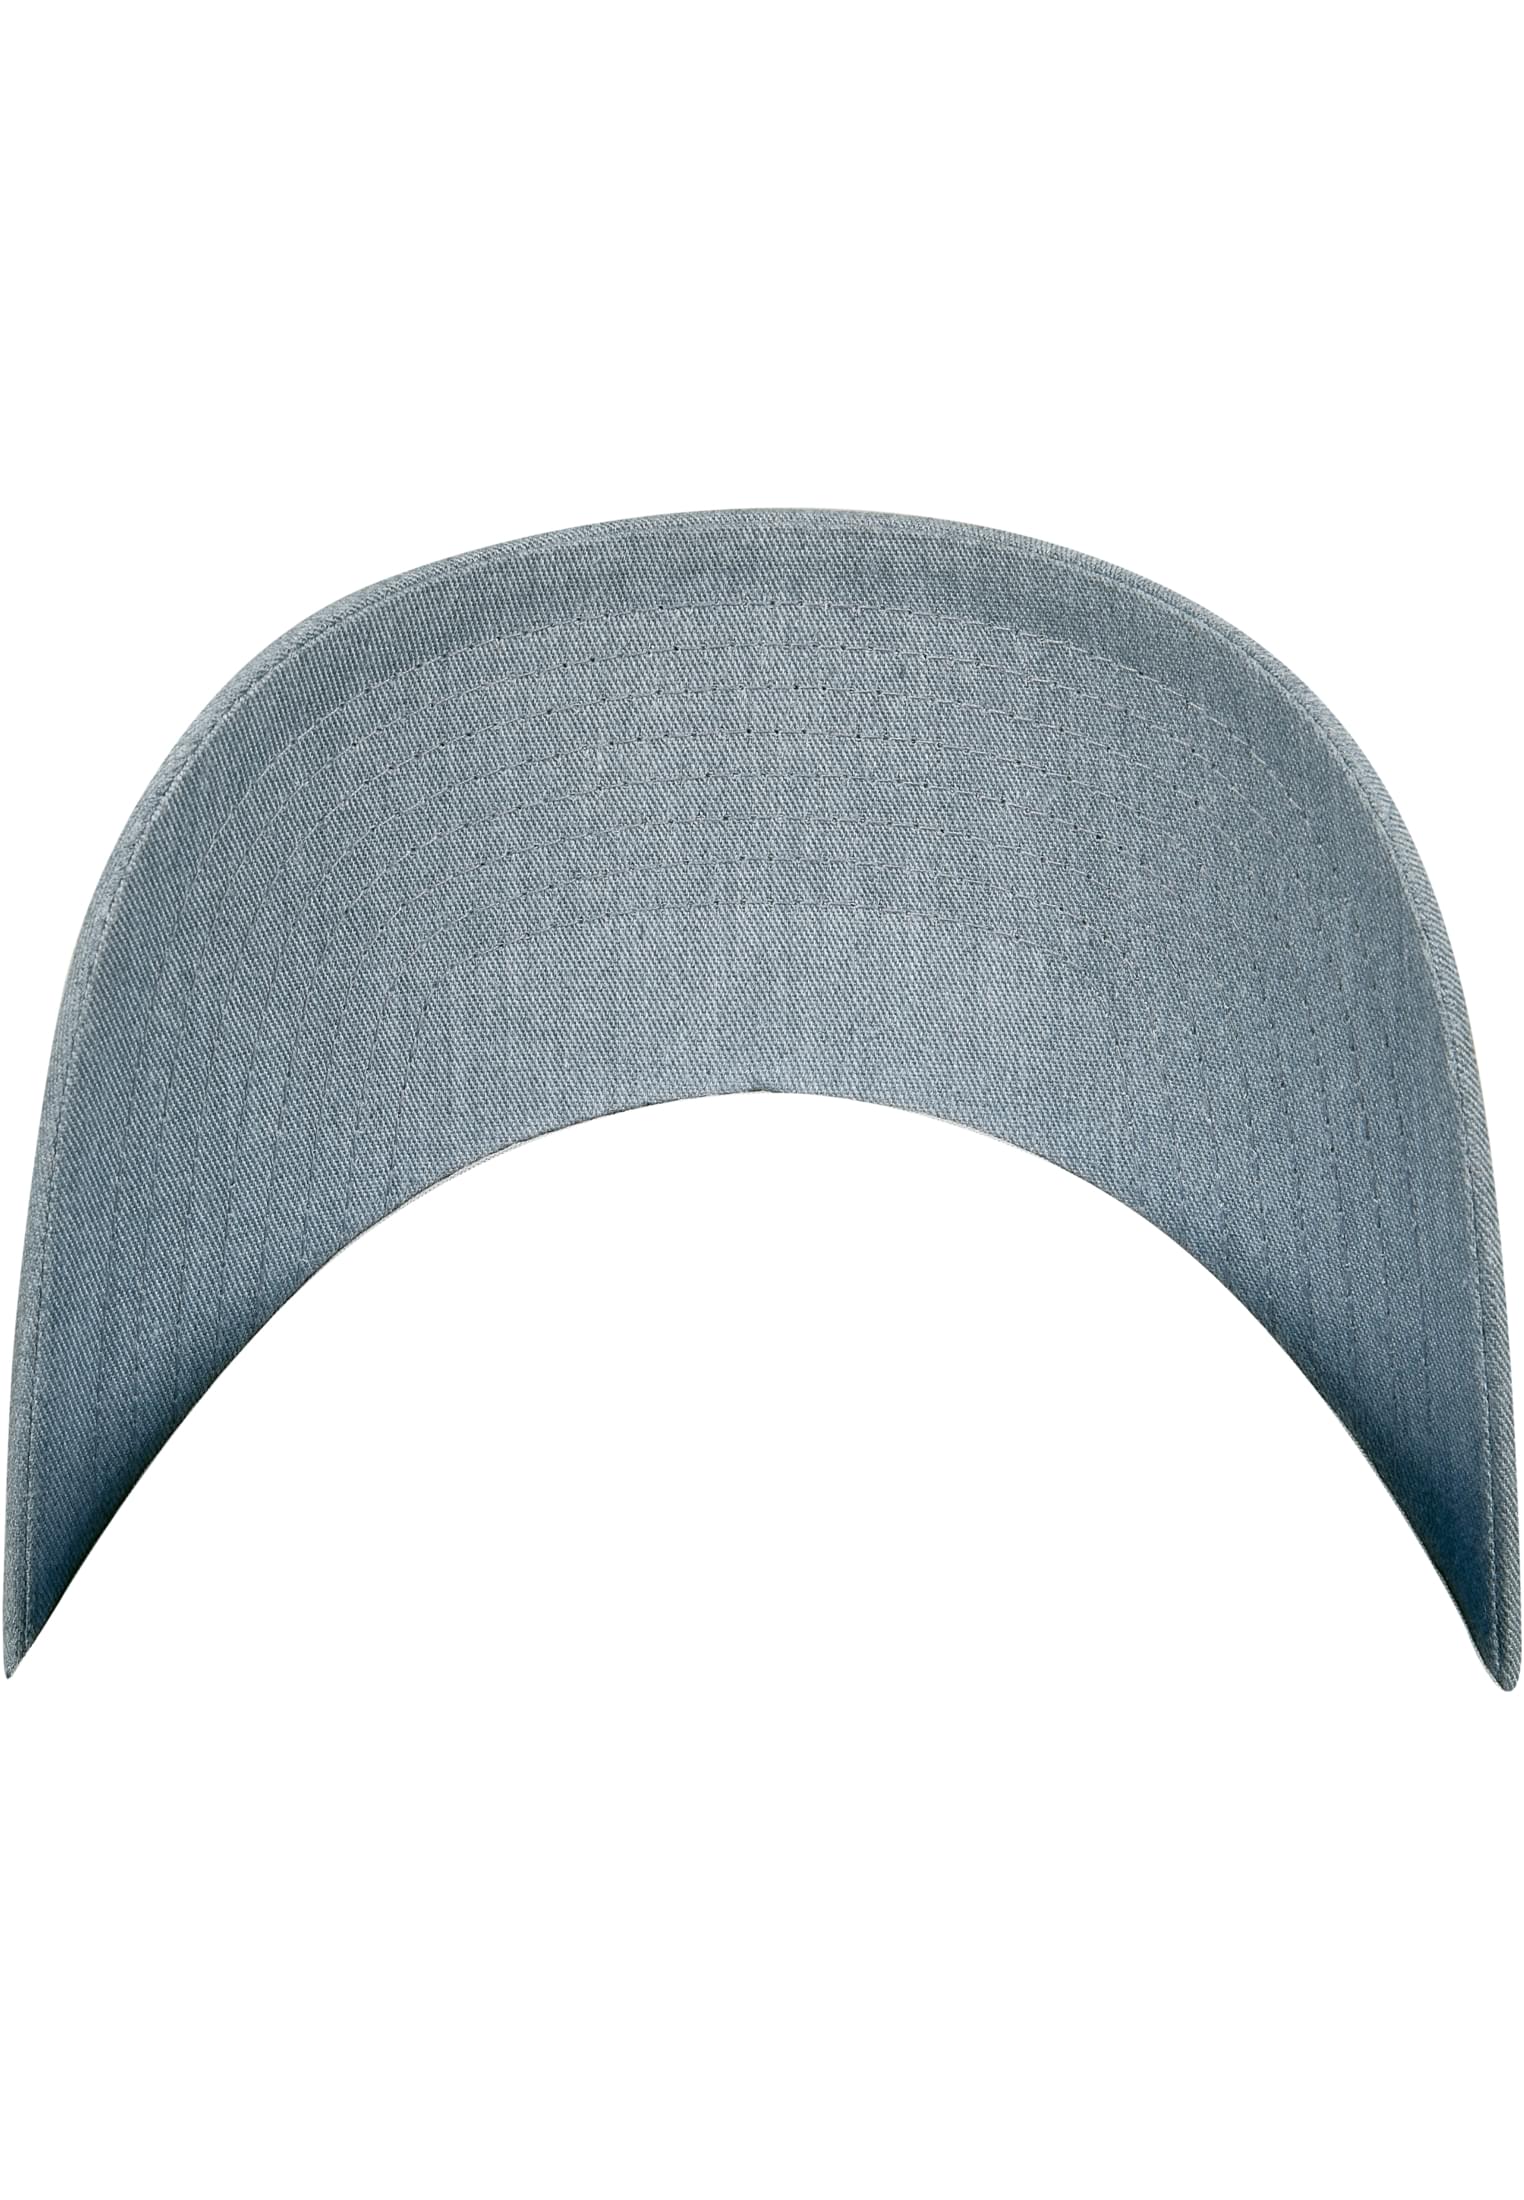 Snapback Curved Classic Snapback in Farbe h.grey